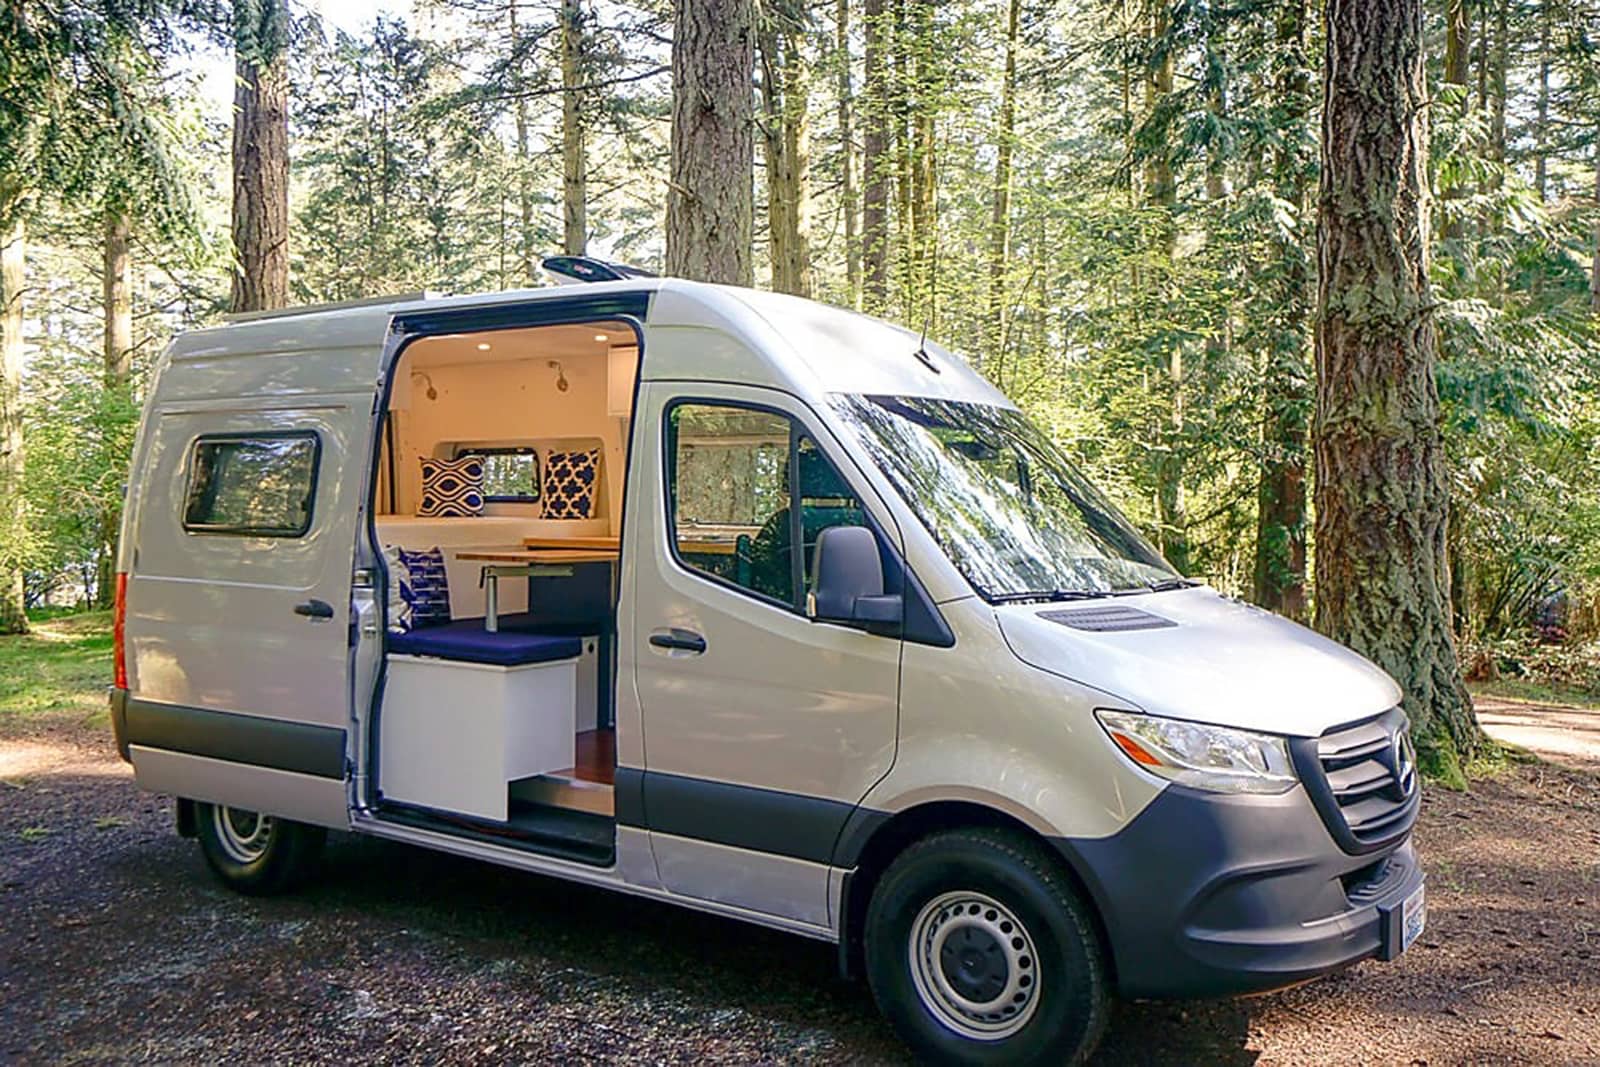 Airbnb for RVs Where to Find RV Rentals by Owner